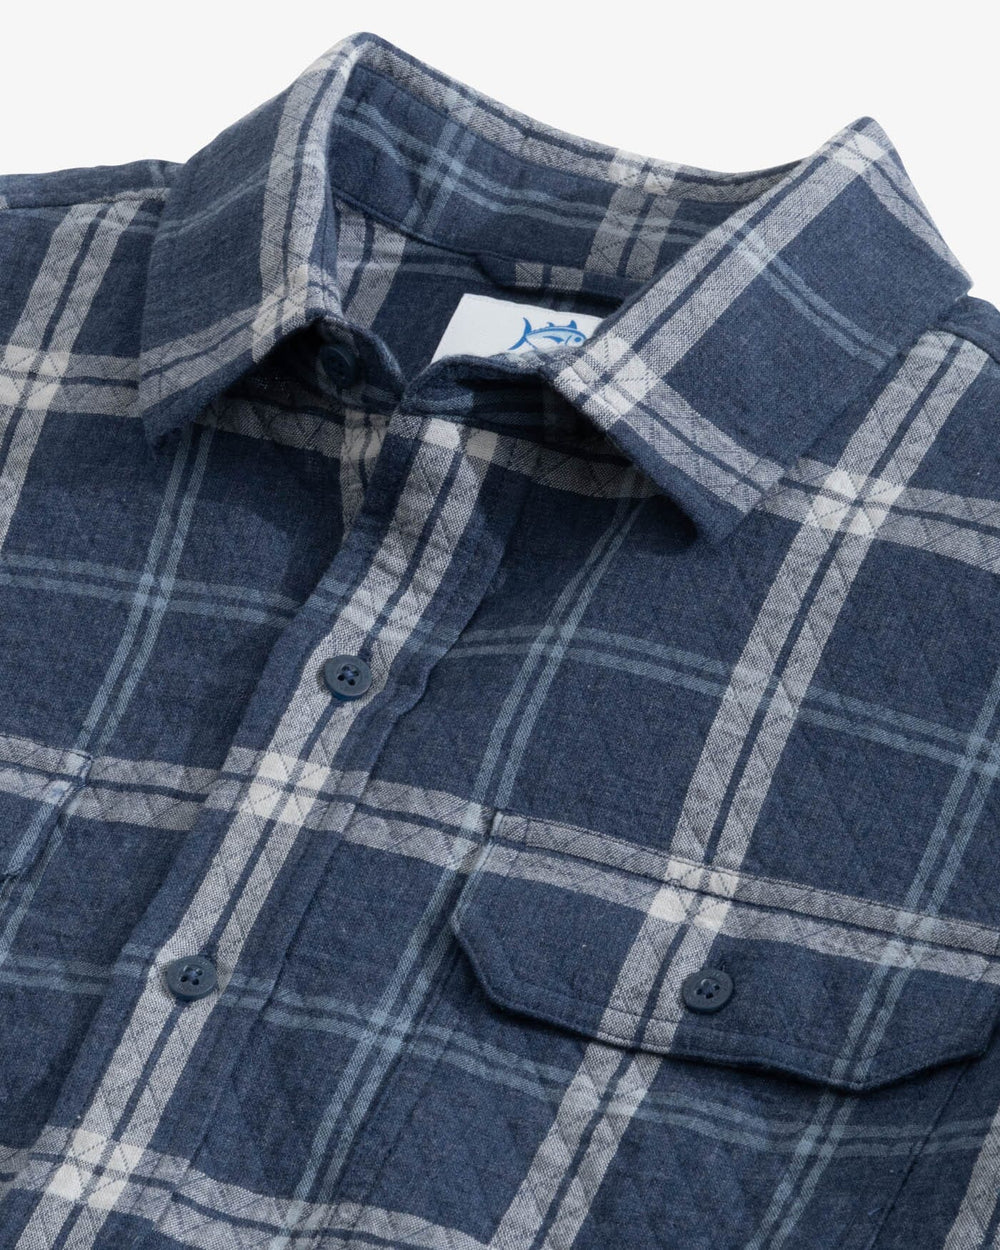 The detail view of the Southern Tide Quilted Heather Ellison Plaid Overshirt Sport Shirt by Southern Tide - Heather Dress Blue